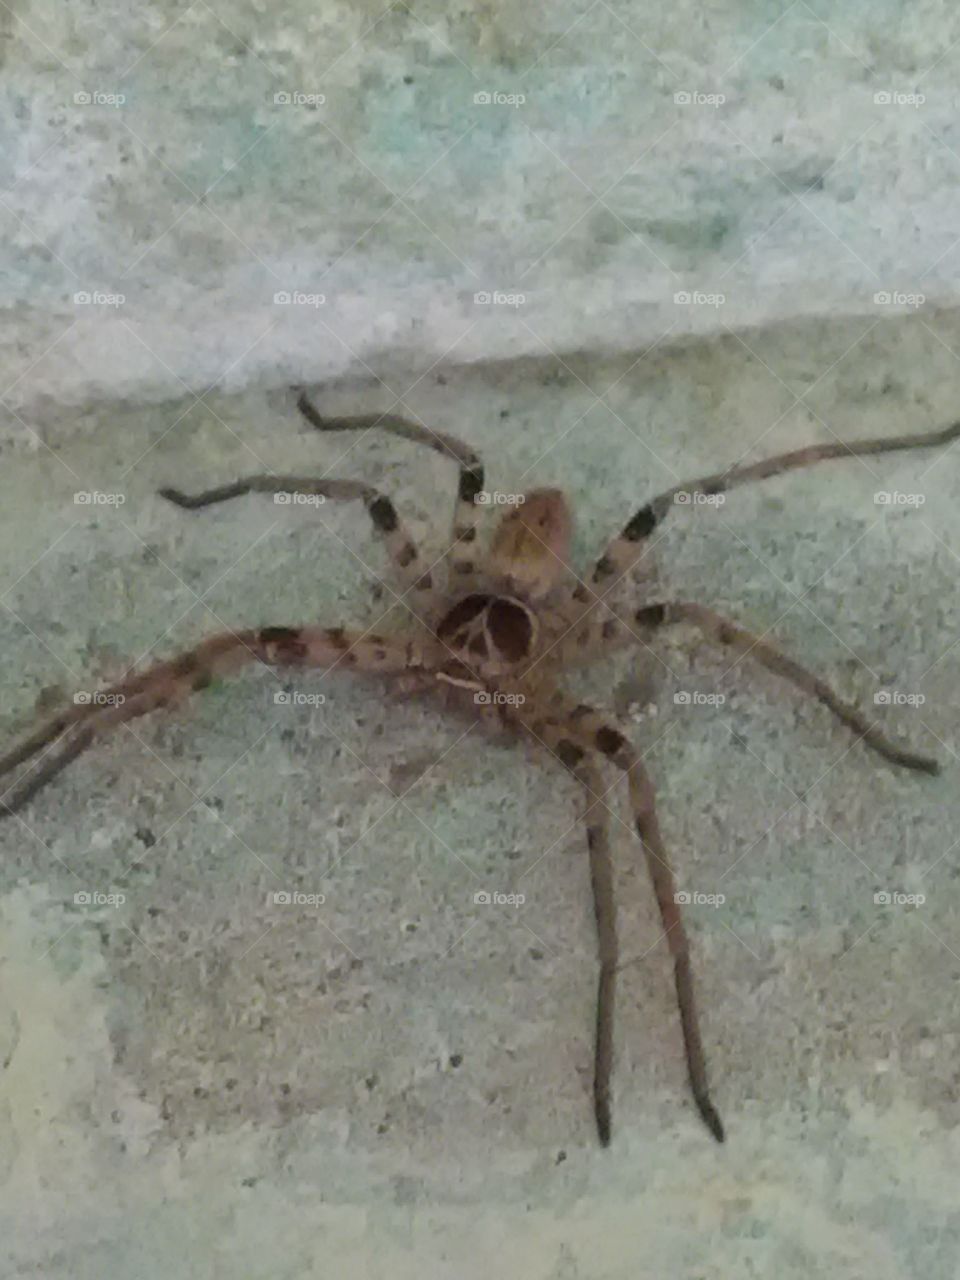 this is a very beautiful but dangerous bigger spider .